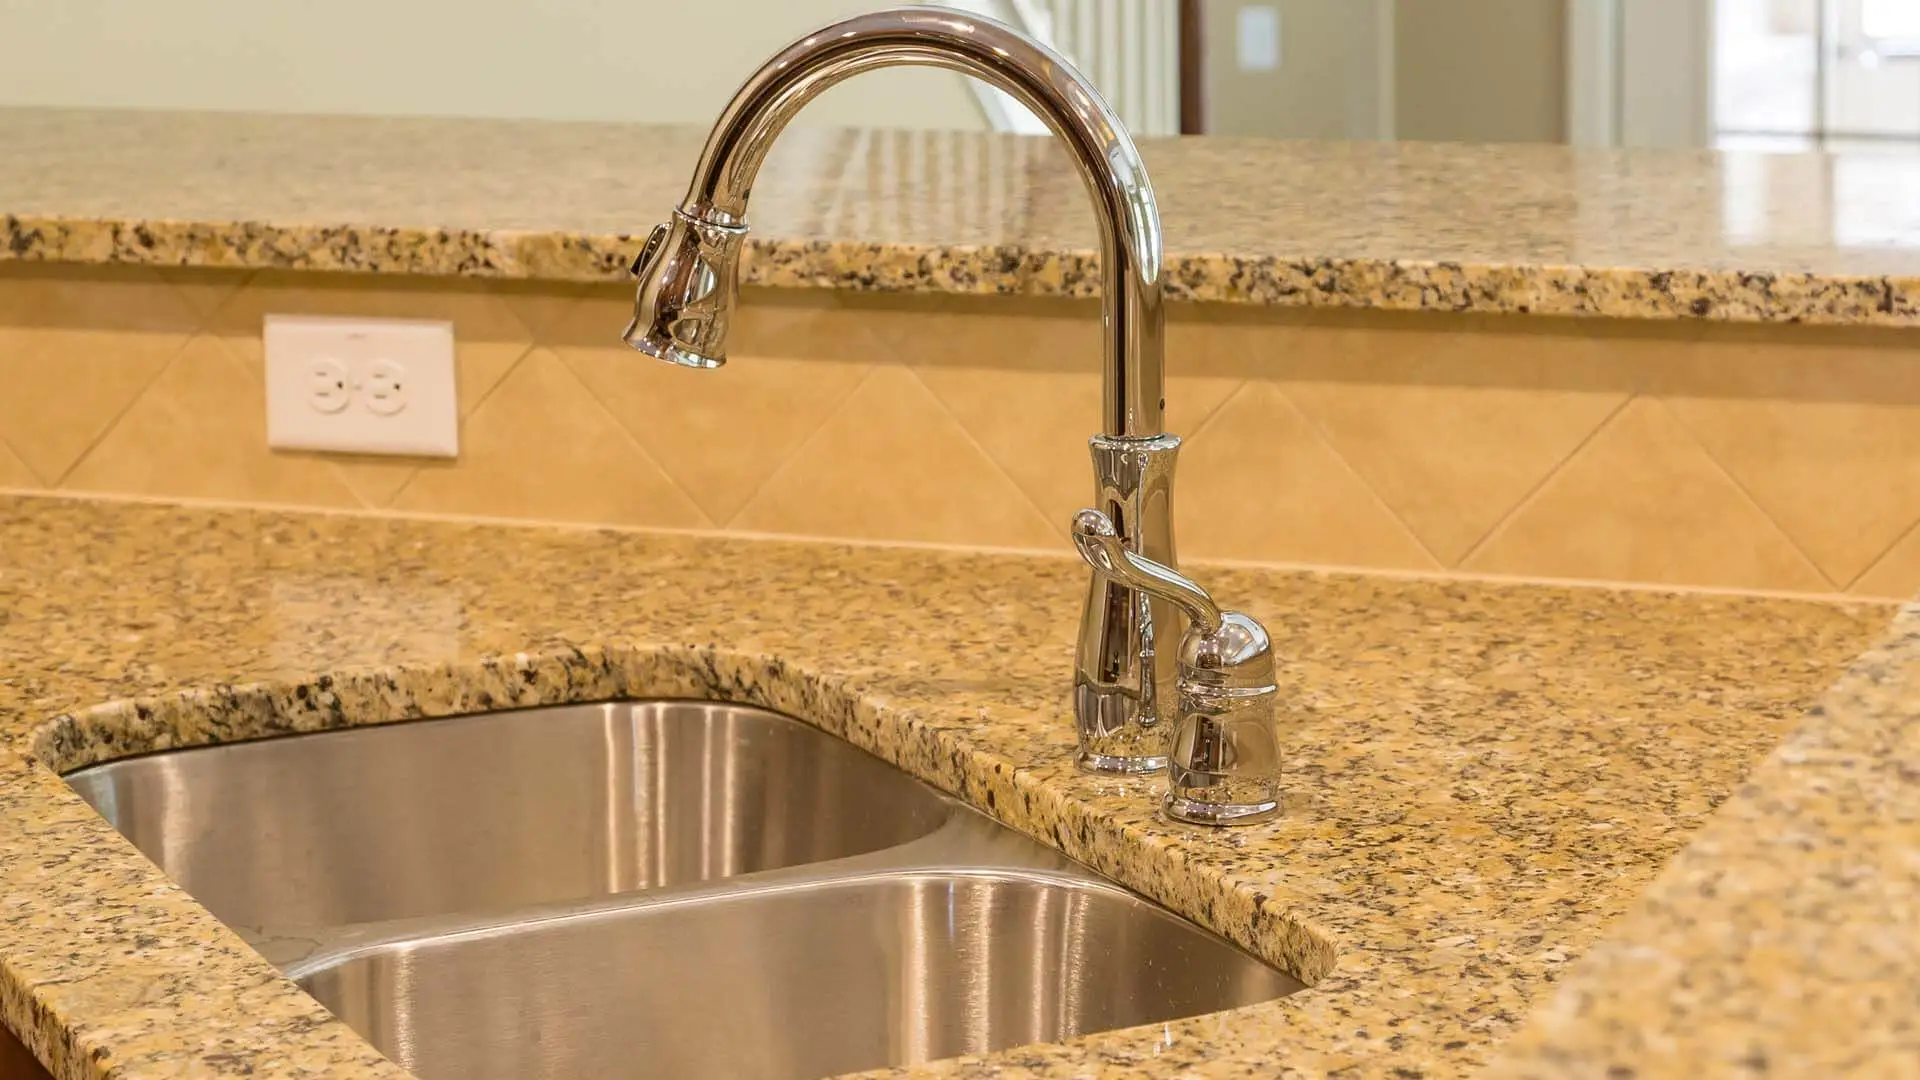 New kitchen faucet installation at home in Winter Haven, FL.